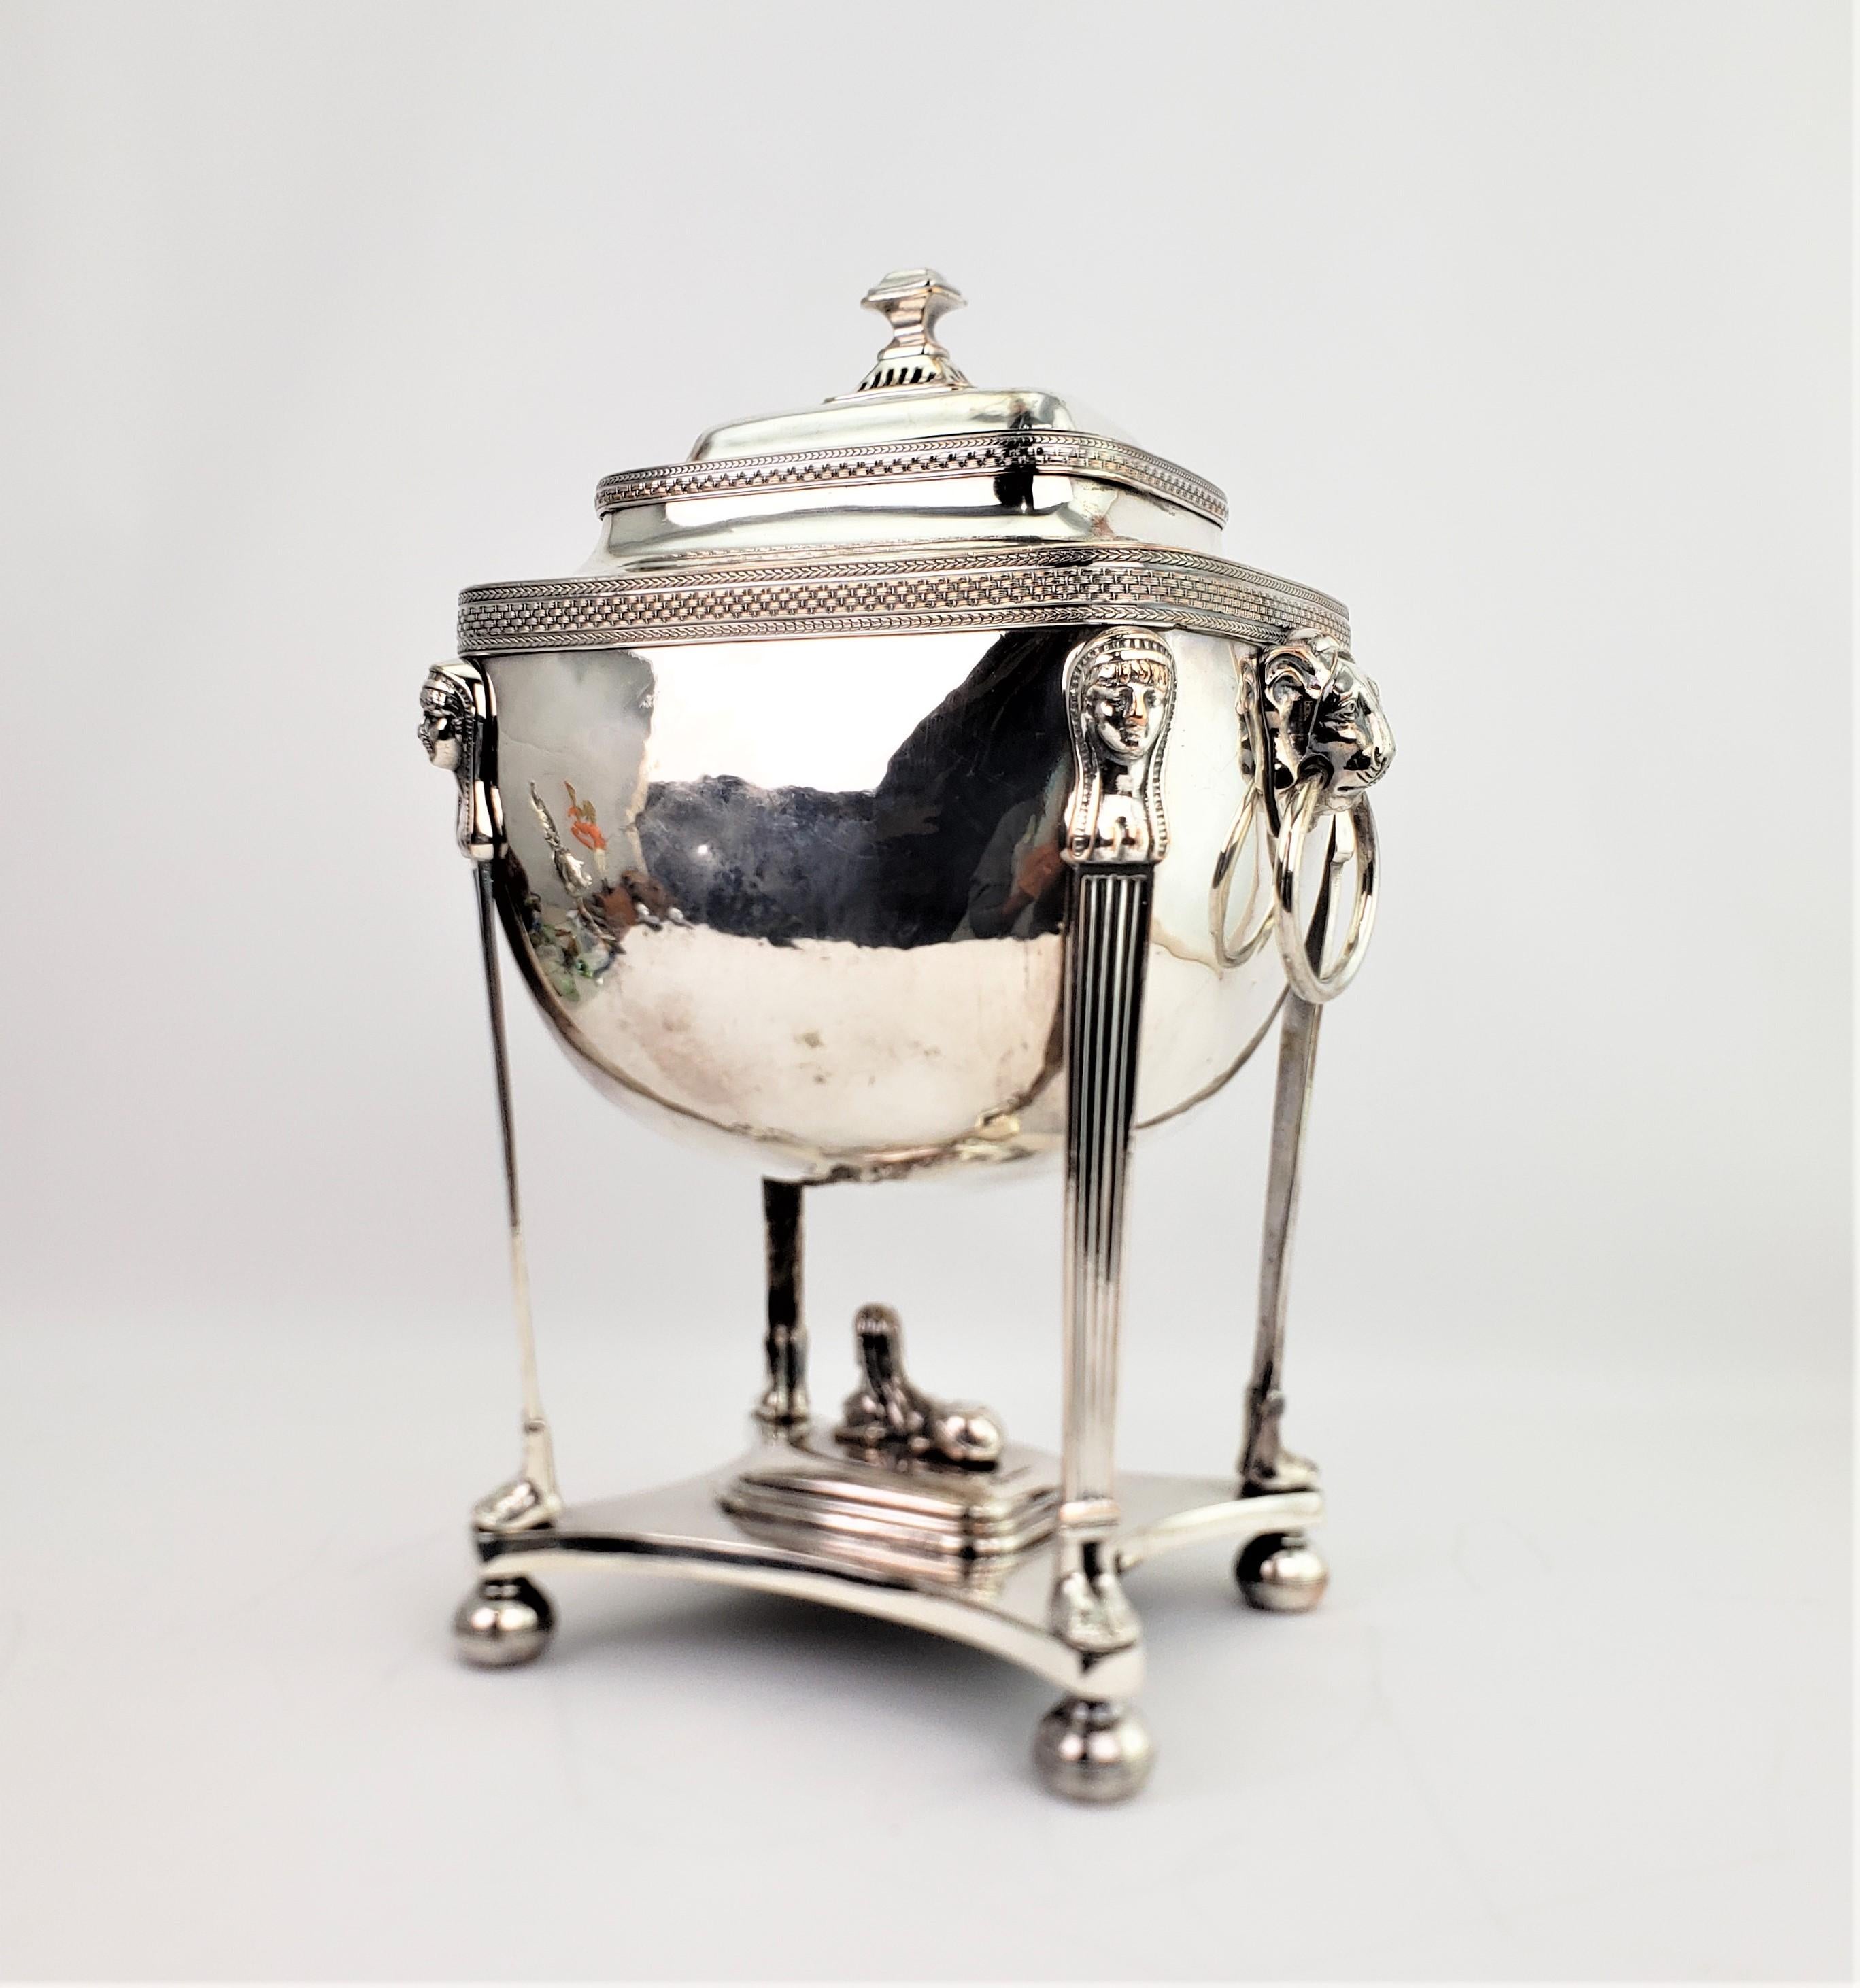 19th Century Antique Old Sheffield Silver Plated Hot Water Server with Egyptian Revival Decor